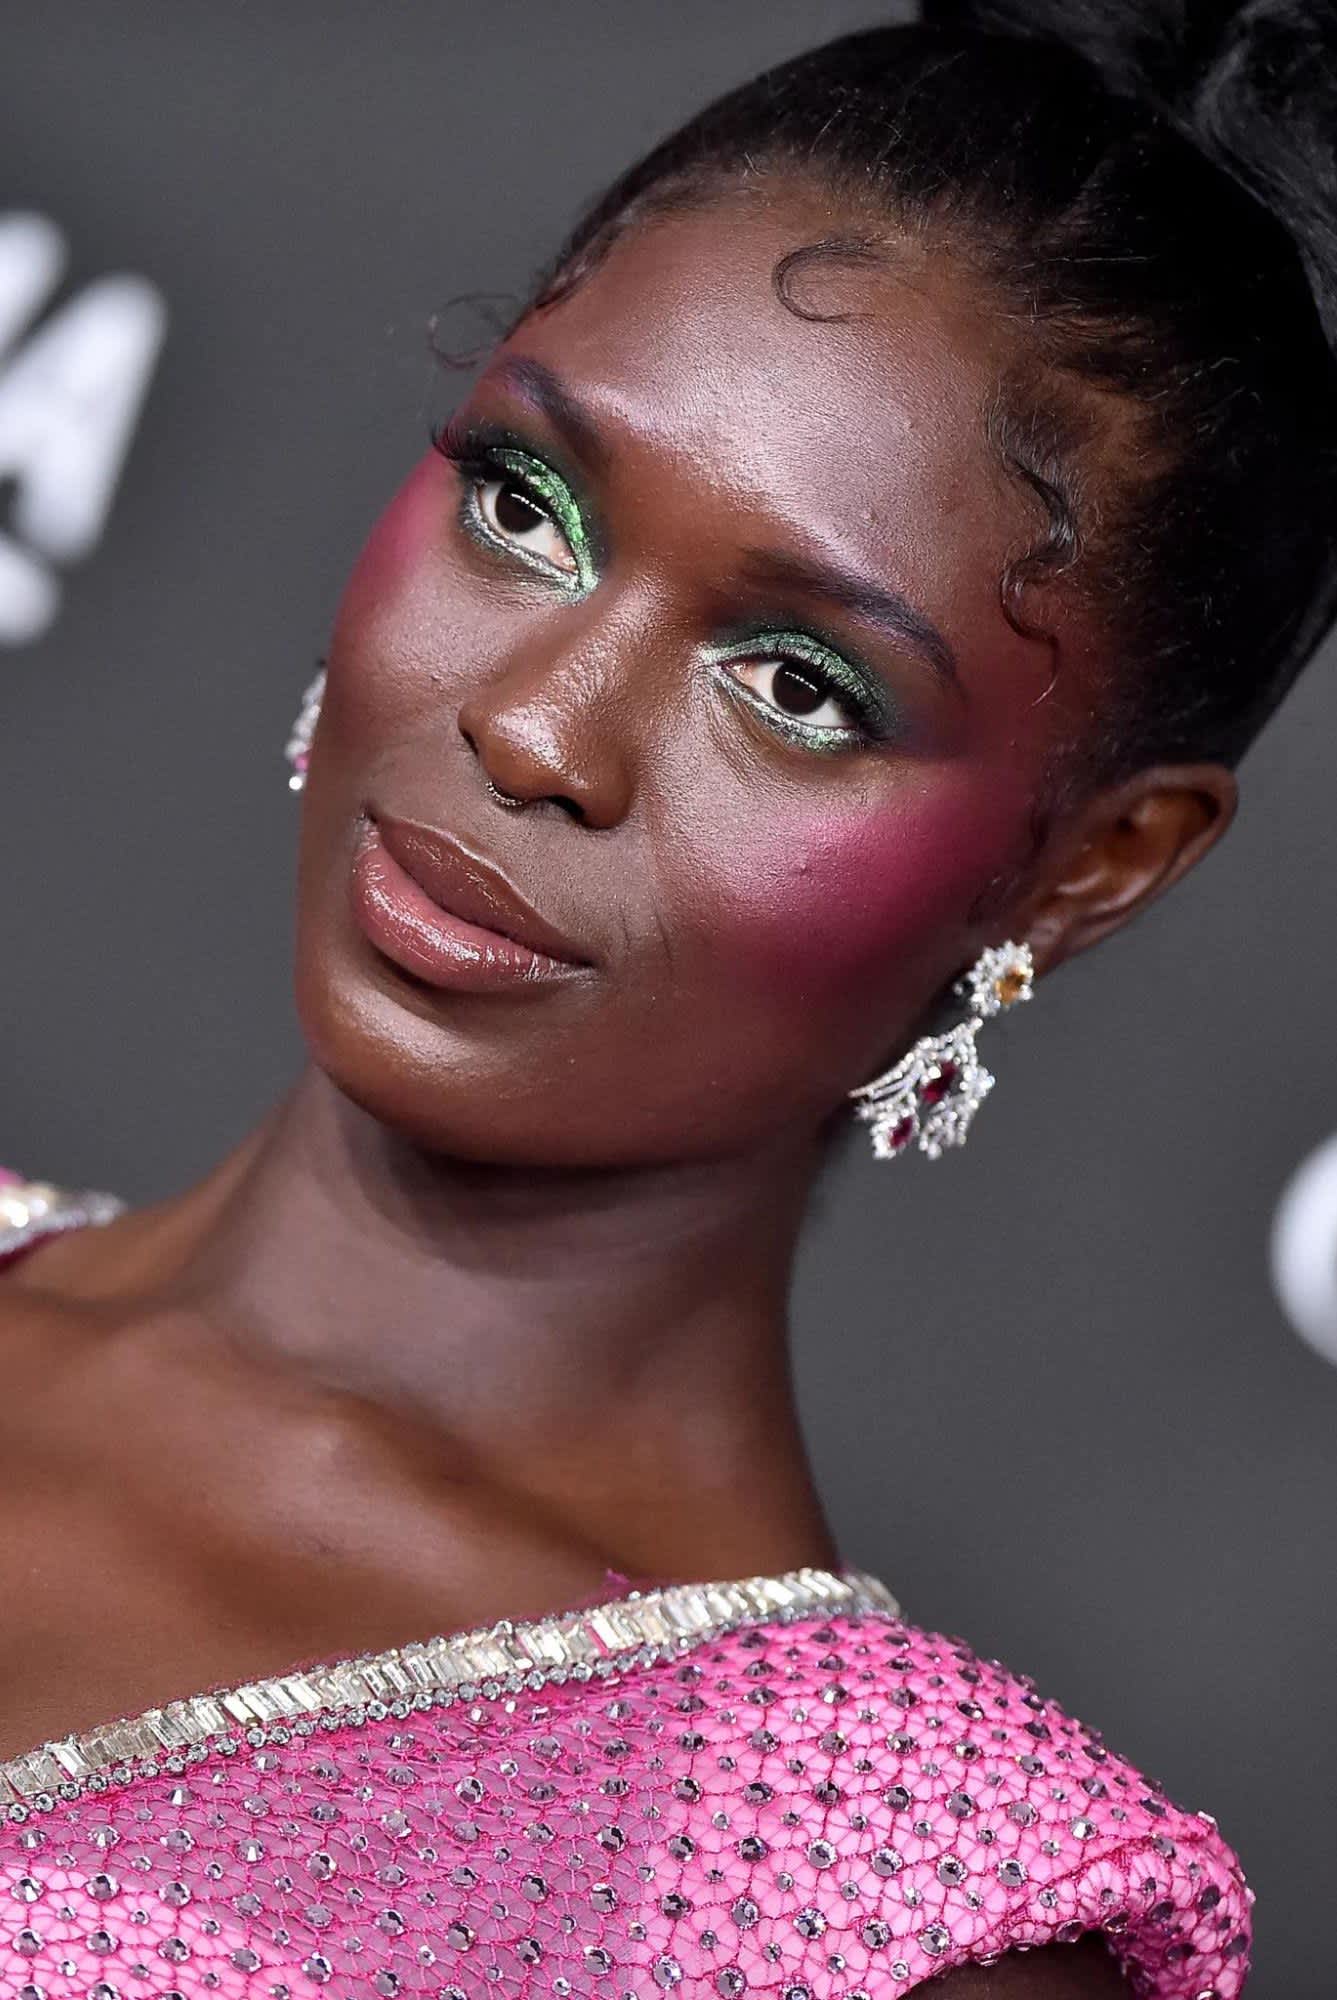 Jodie Turner Smith on the LACMA Red Carpet with a popping emerald green eye makeup